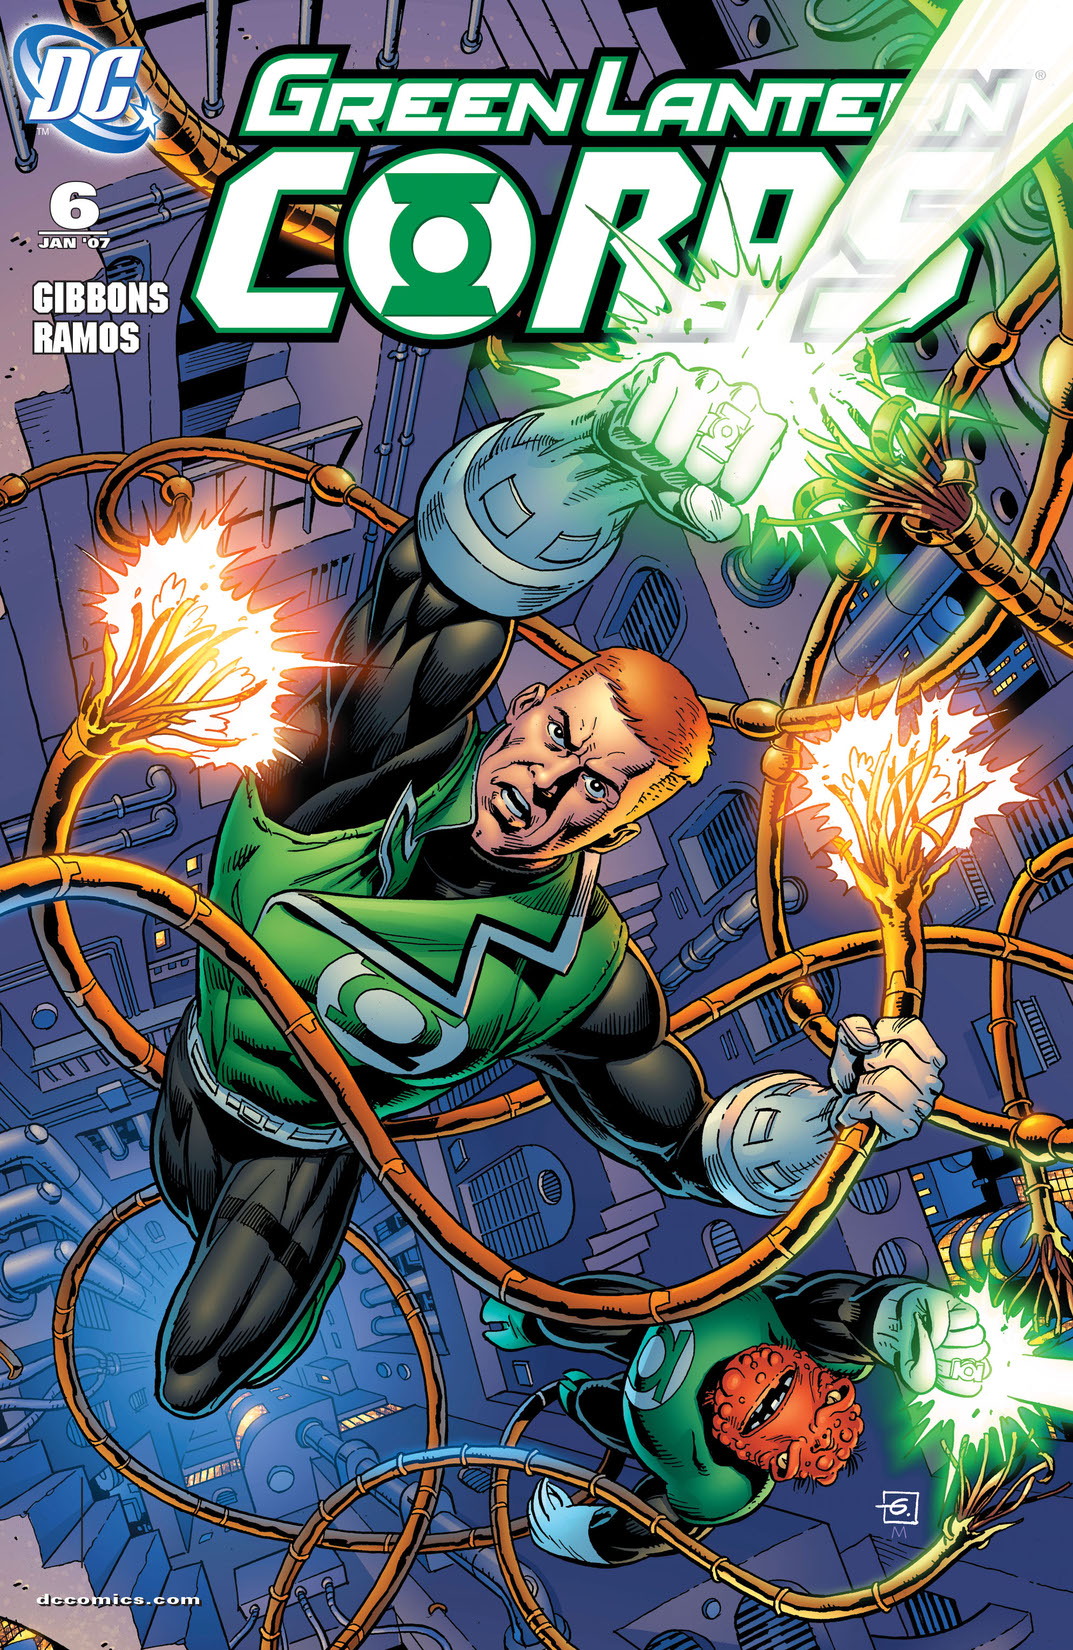 Green Lantern Corps (2006-) #6 preview images